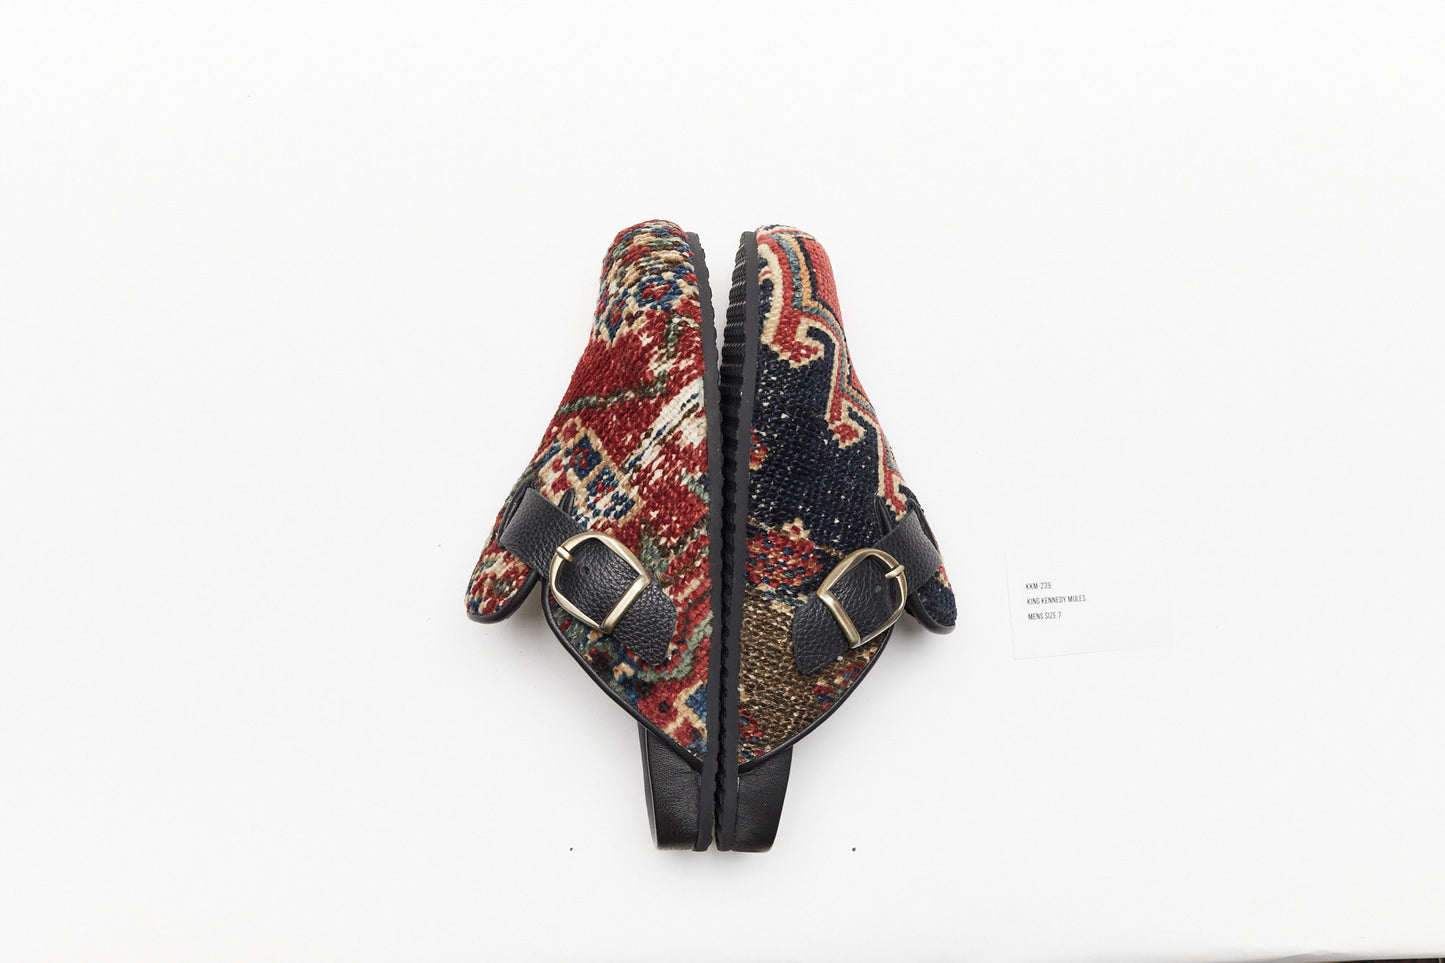 Buckle side view of these one-of-a-kind mules made of 100 year old antique Persian rug fragments with soft lambskin footbed and rubber sole. Similar in shape to the Birkenstock Boston clog. These men's size 7 are made of an antique red, blue and white rug with zig zag patterns.